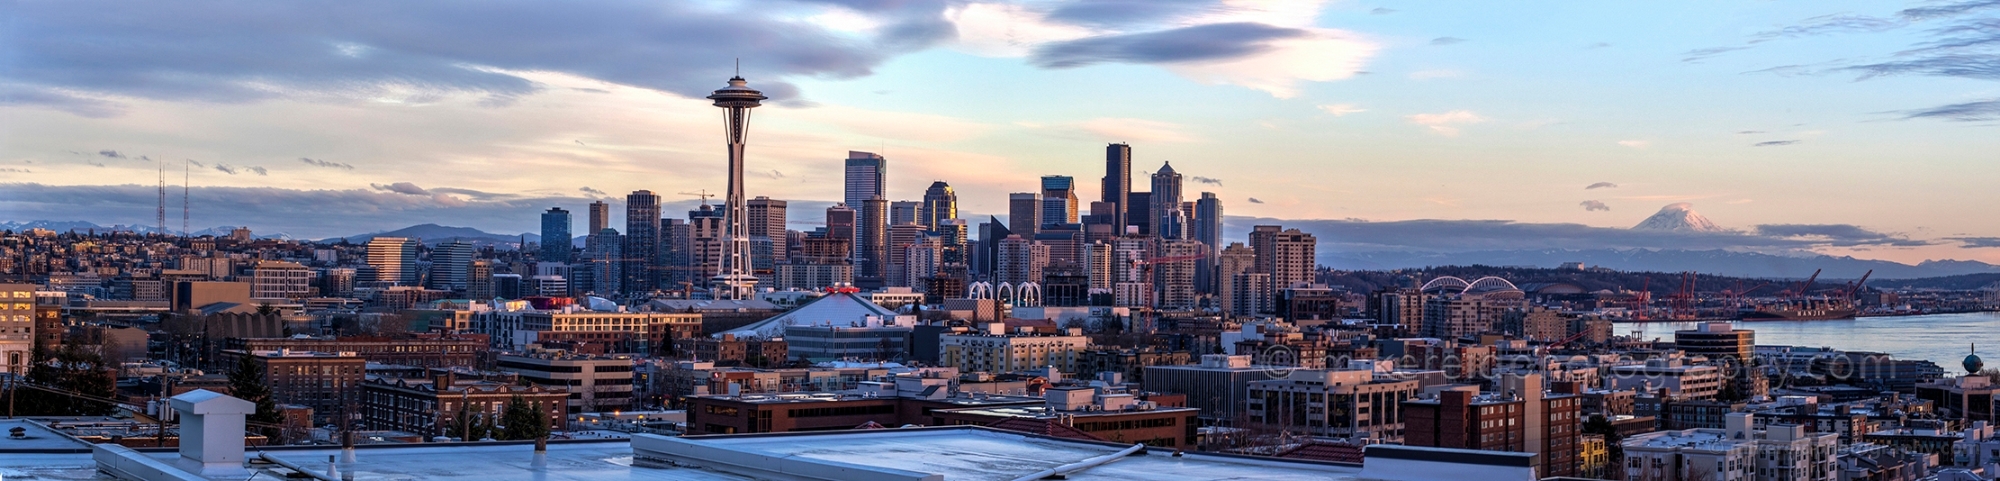 Seattle From Queen Anne Panorama.jpg 